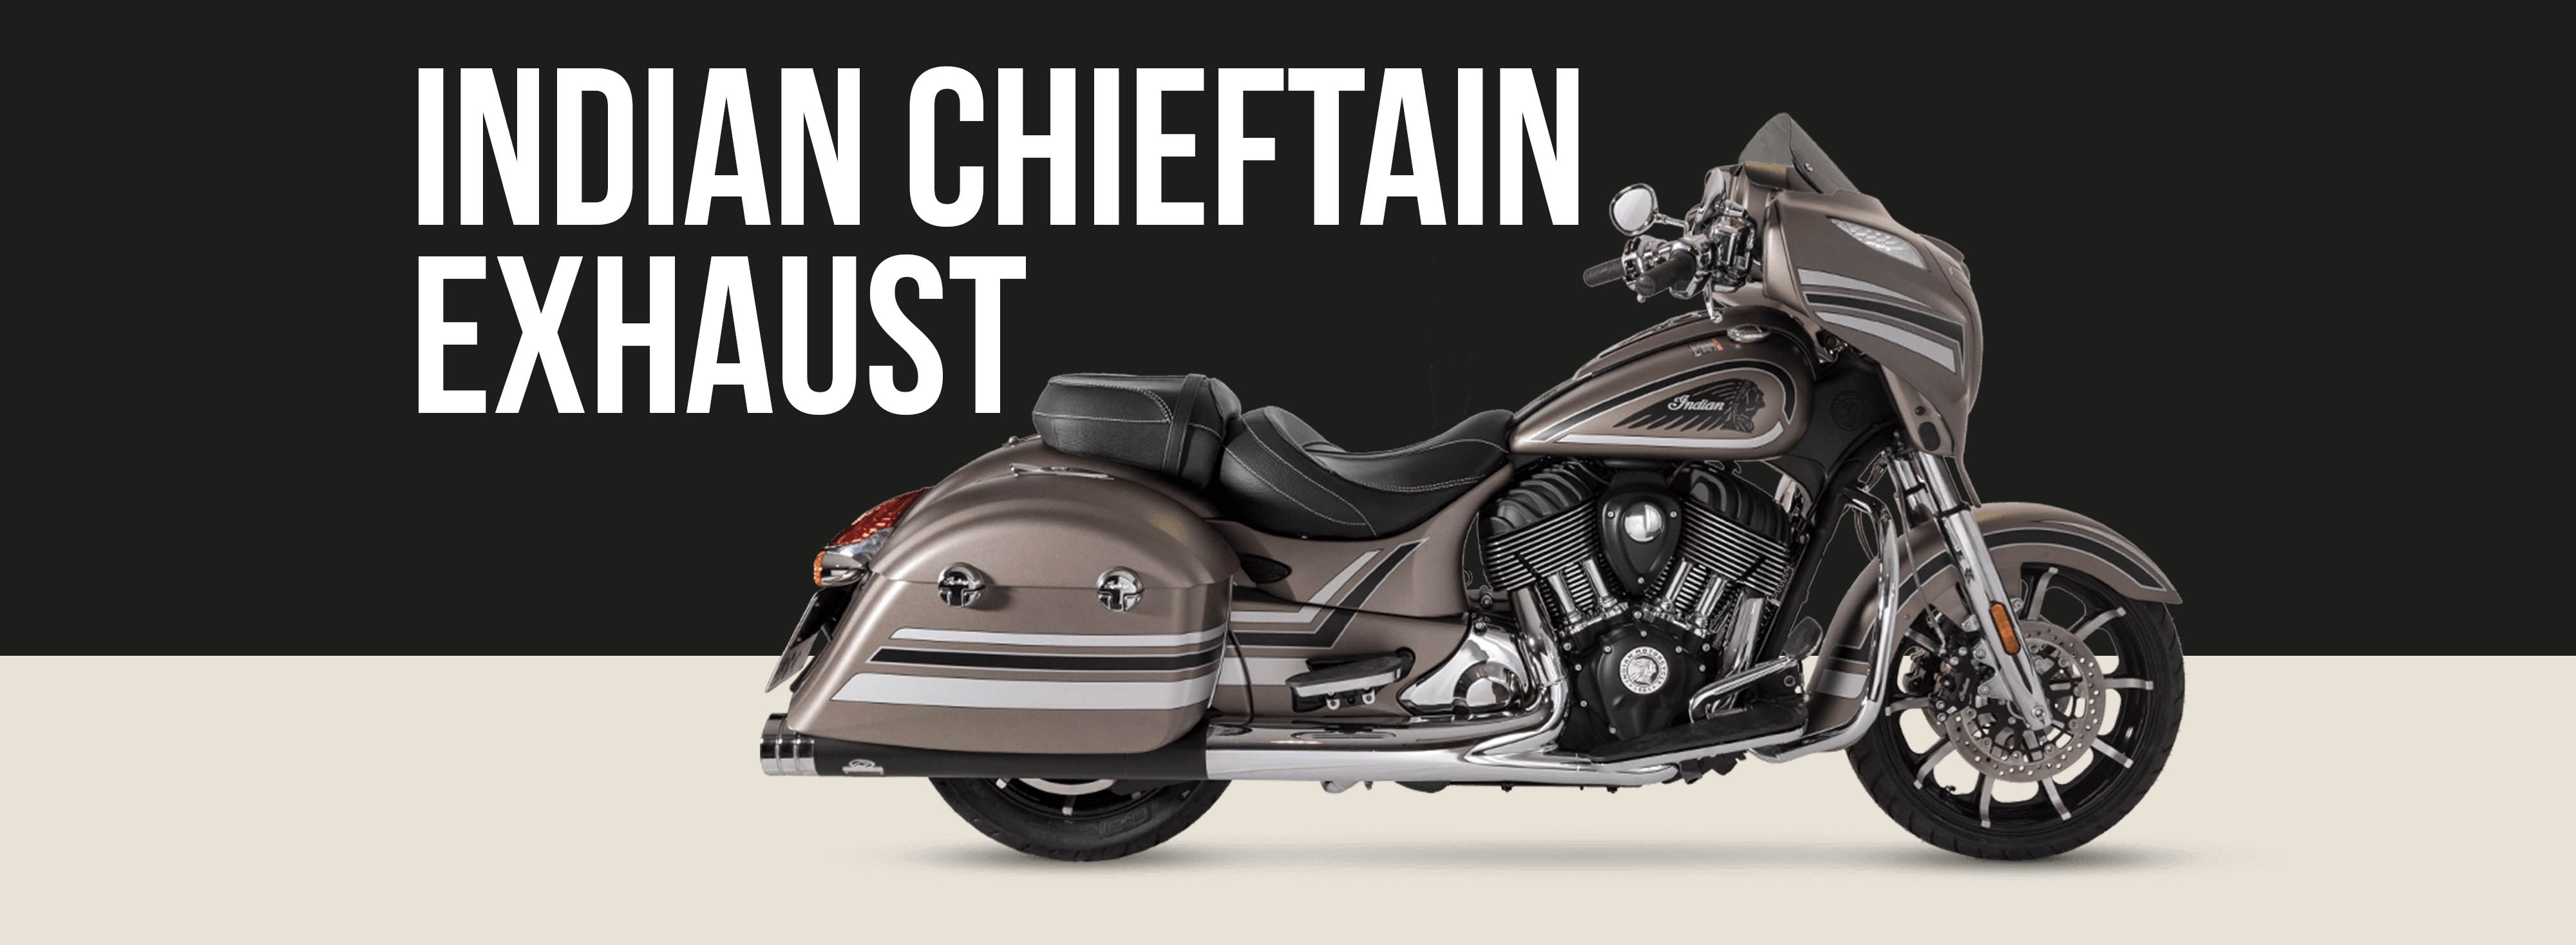 Indian Chieftain Motorcycle Brand Page Header